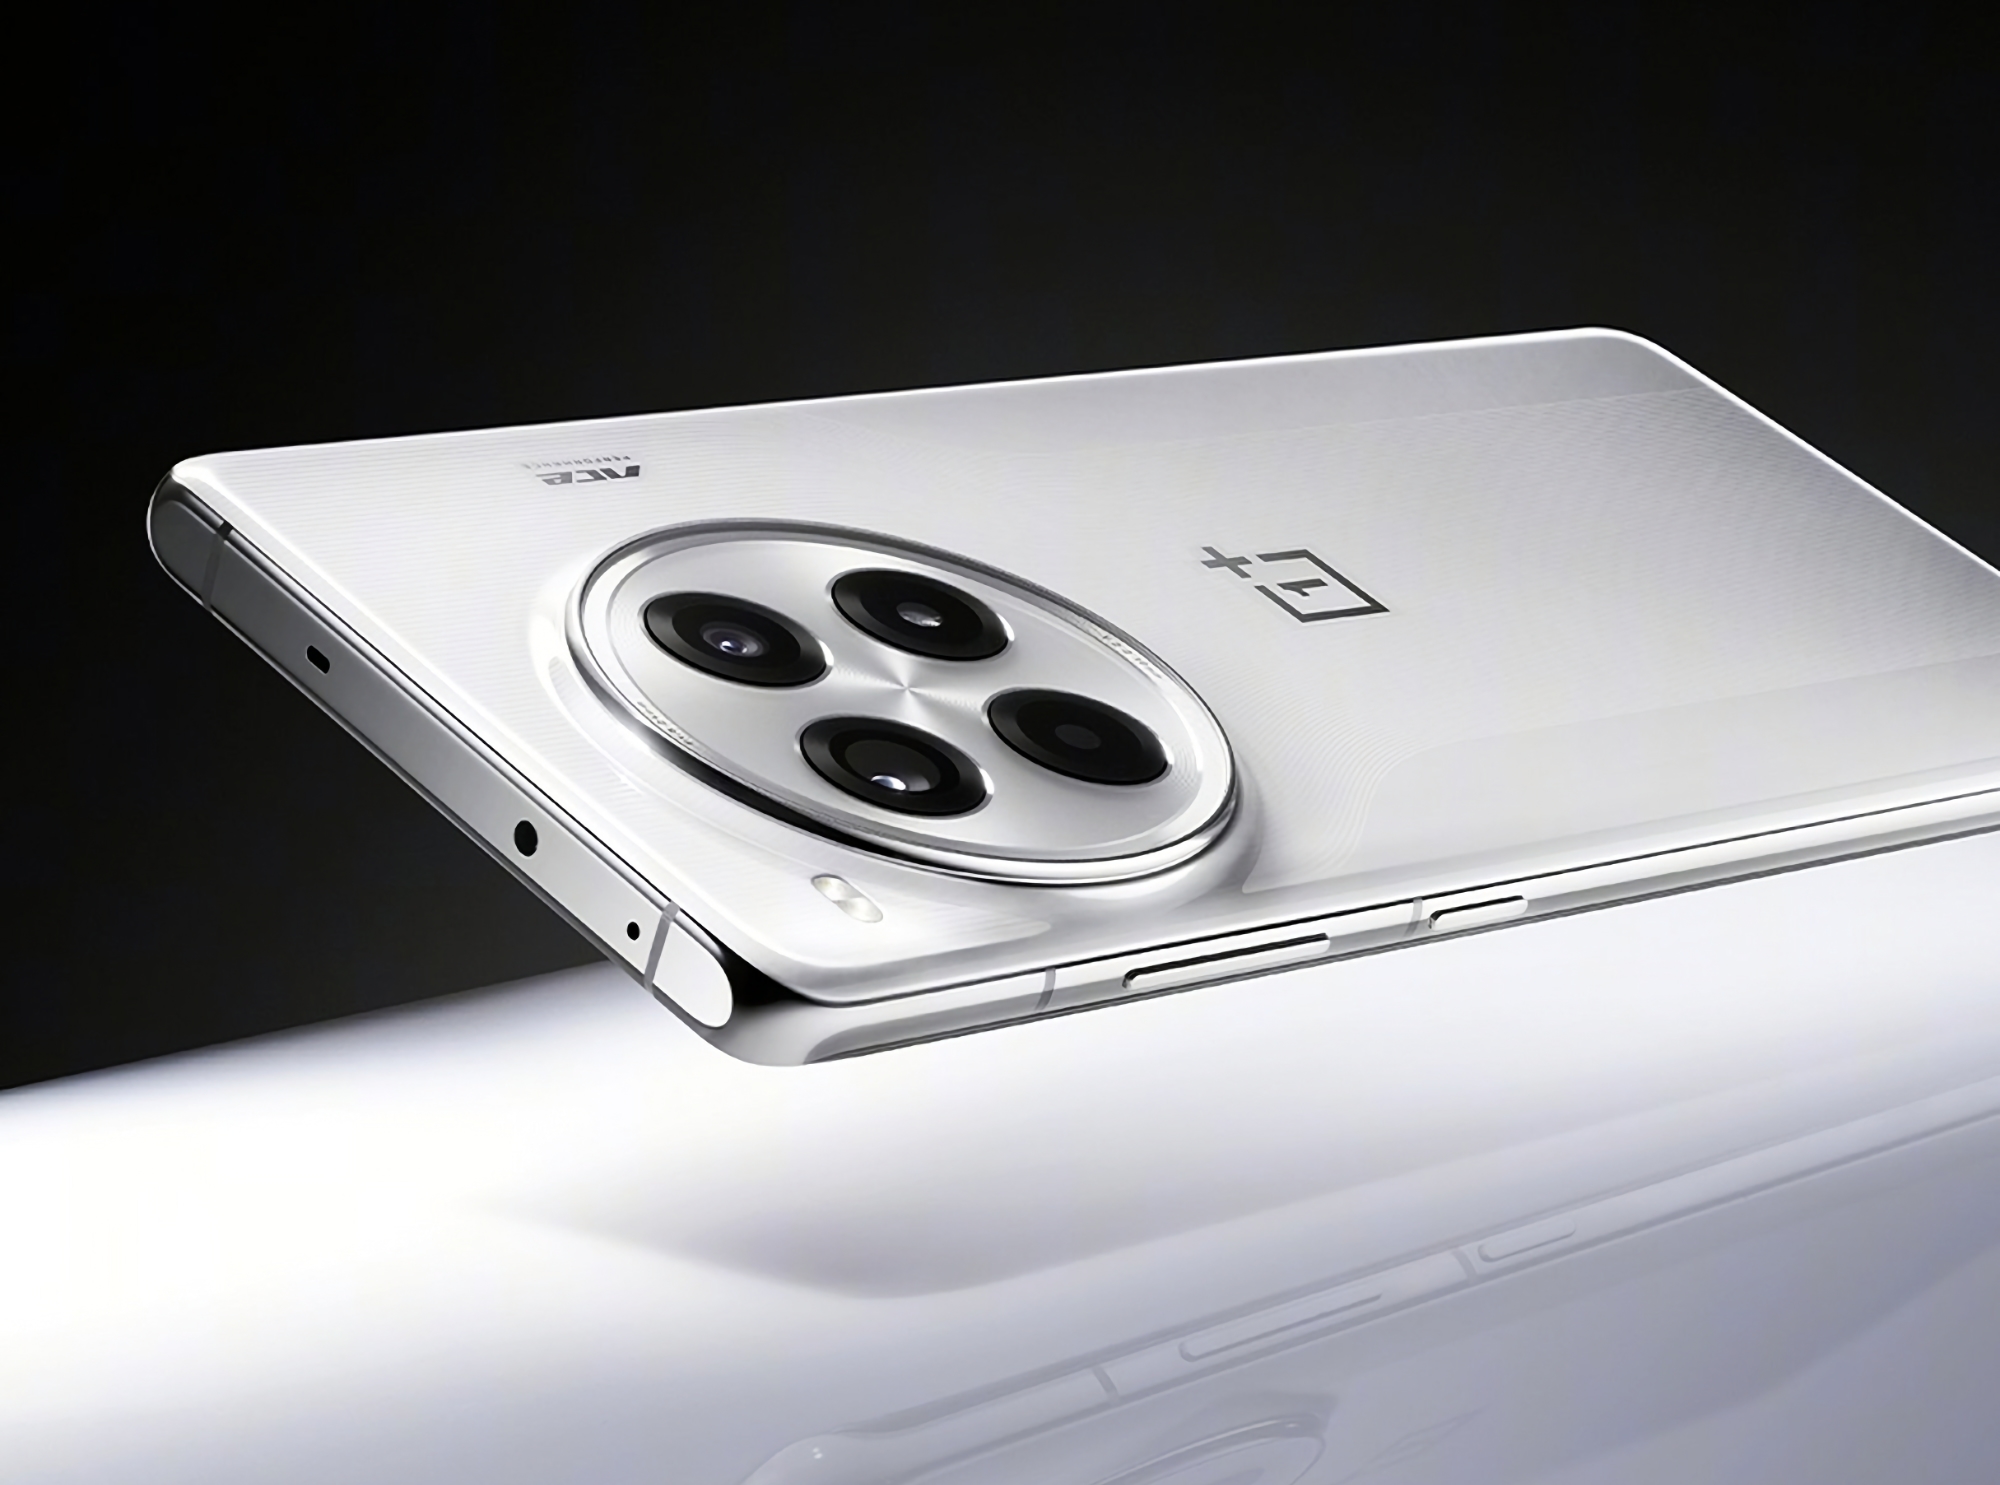 Without waiting for the presentation: OnePlus has revealed the look of the OnePlus Ace 3 Pro